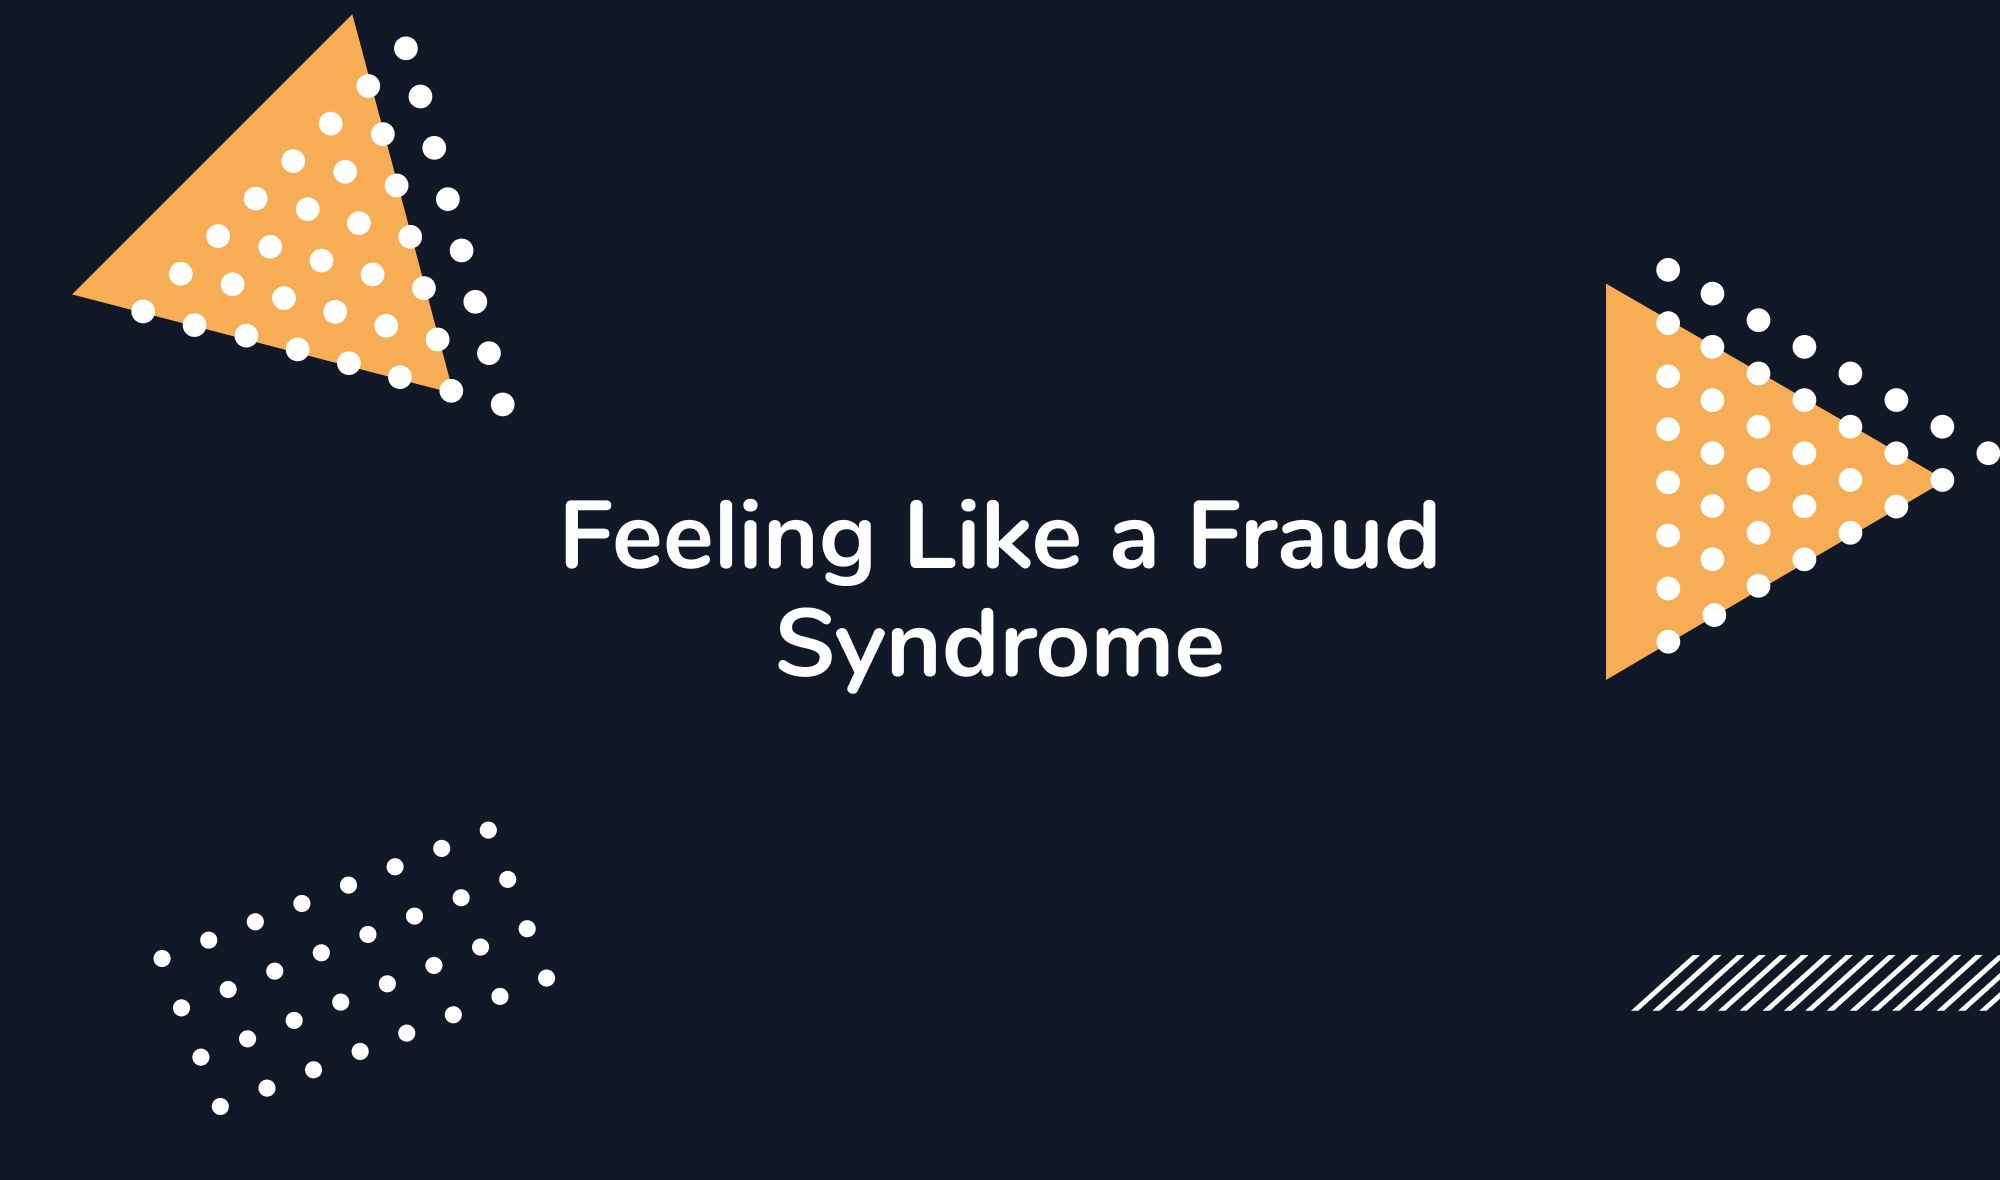 Feeling Like a Fraud Syndrome: A Psychological Perspective